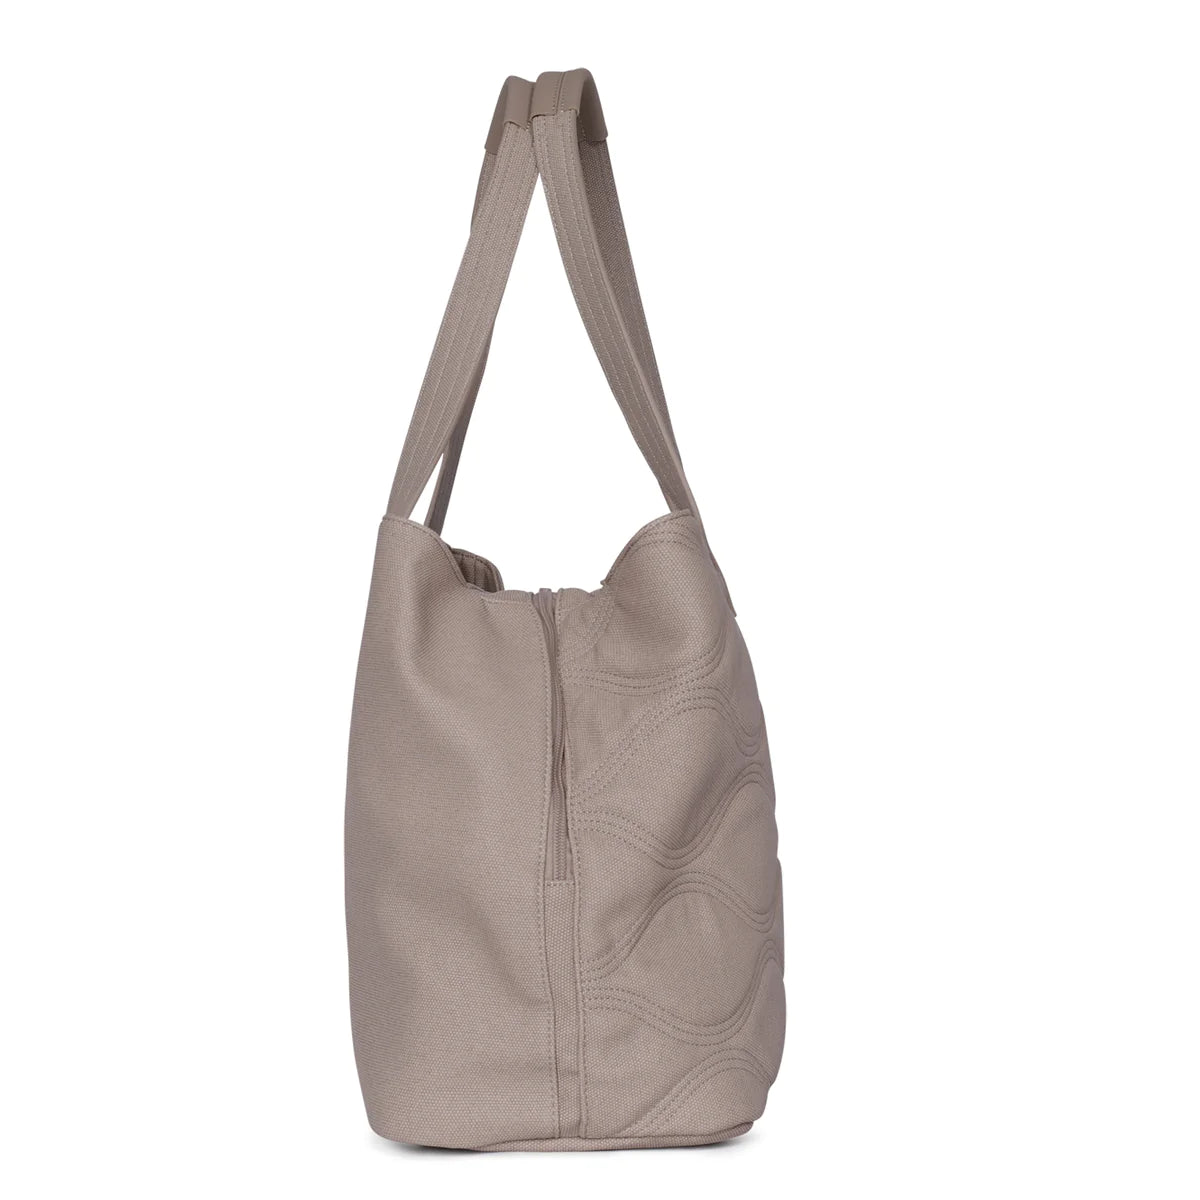 Lug Tempo Matte Lux VL Large Bag. New W Tags/Peta Approved